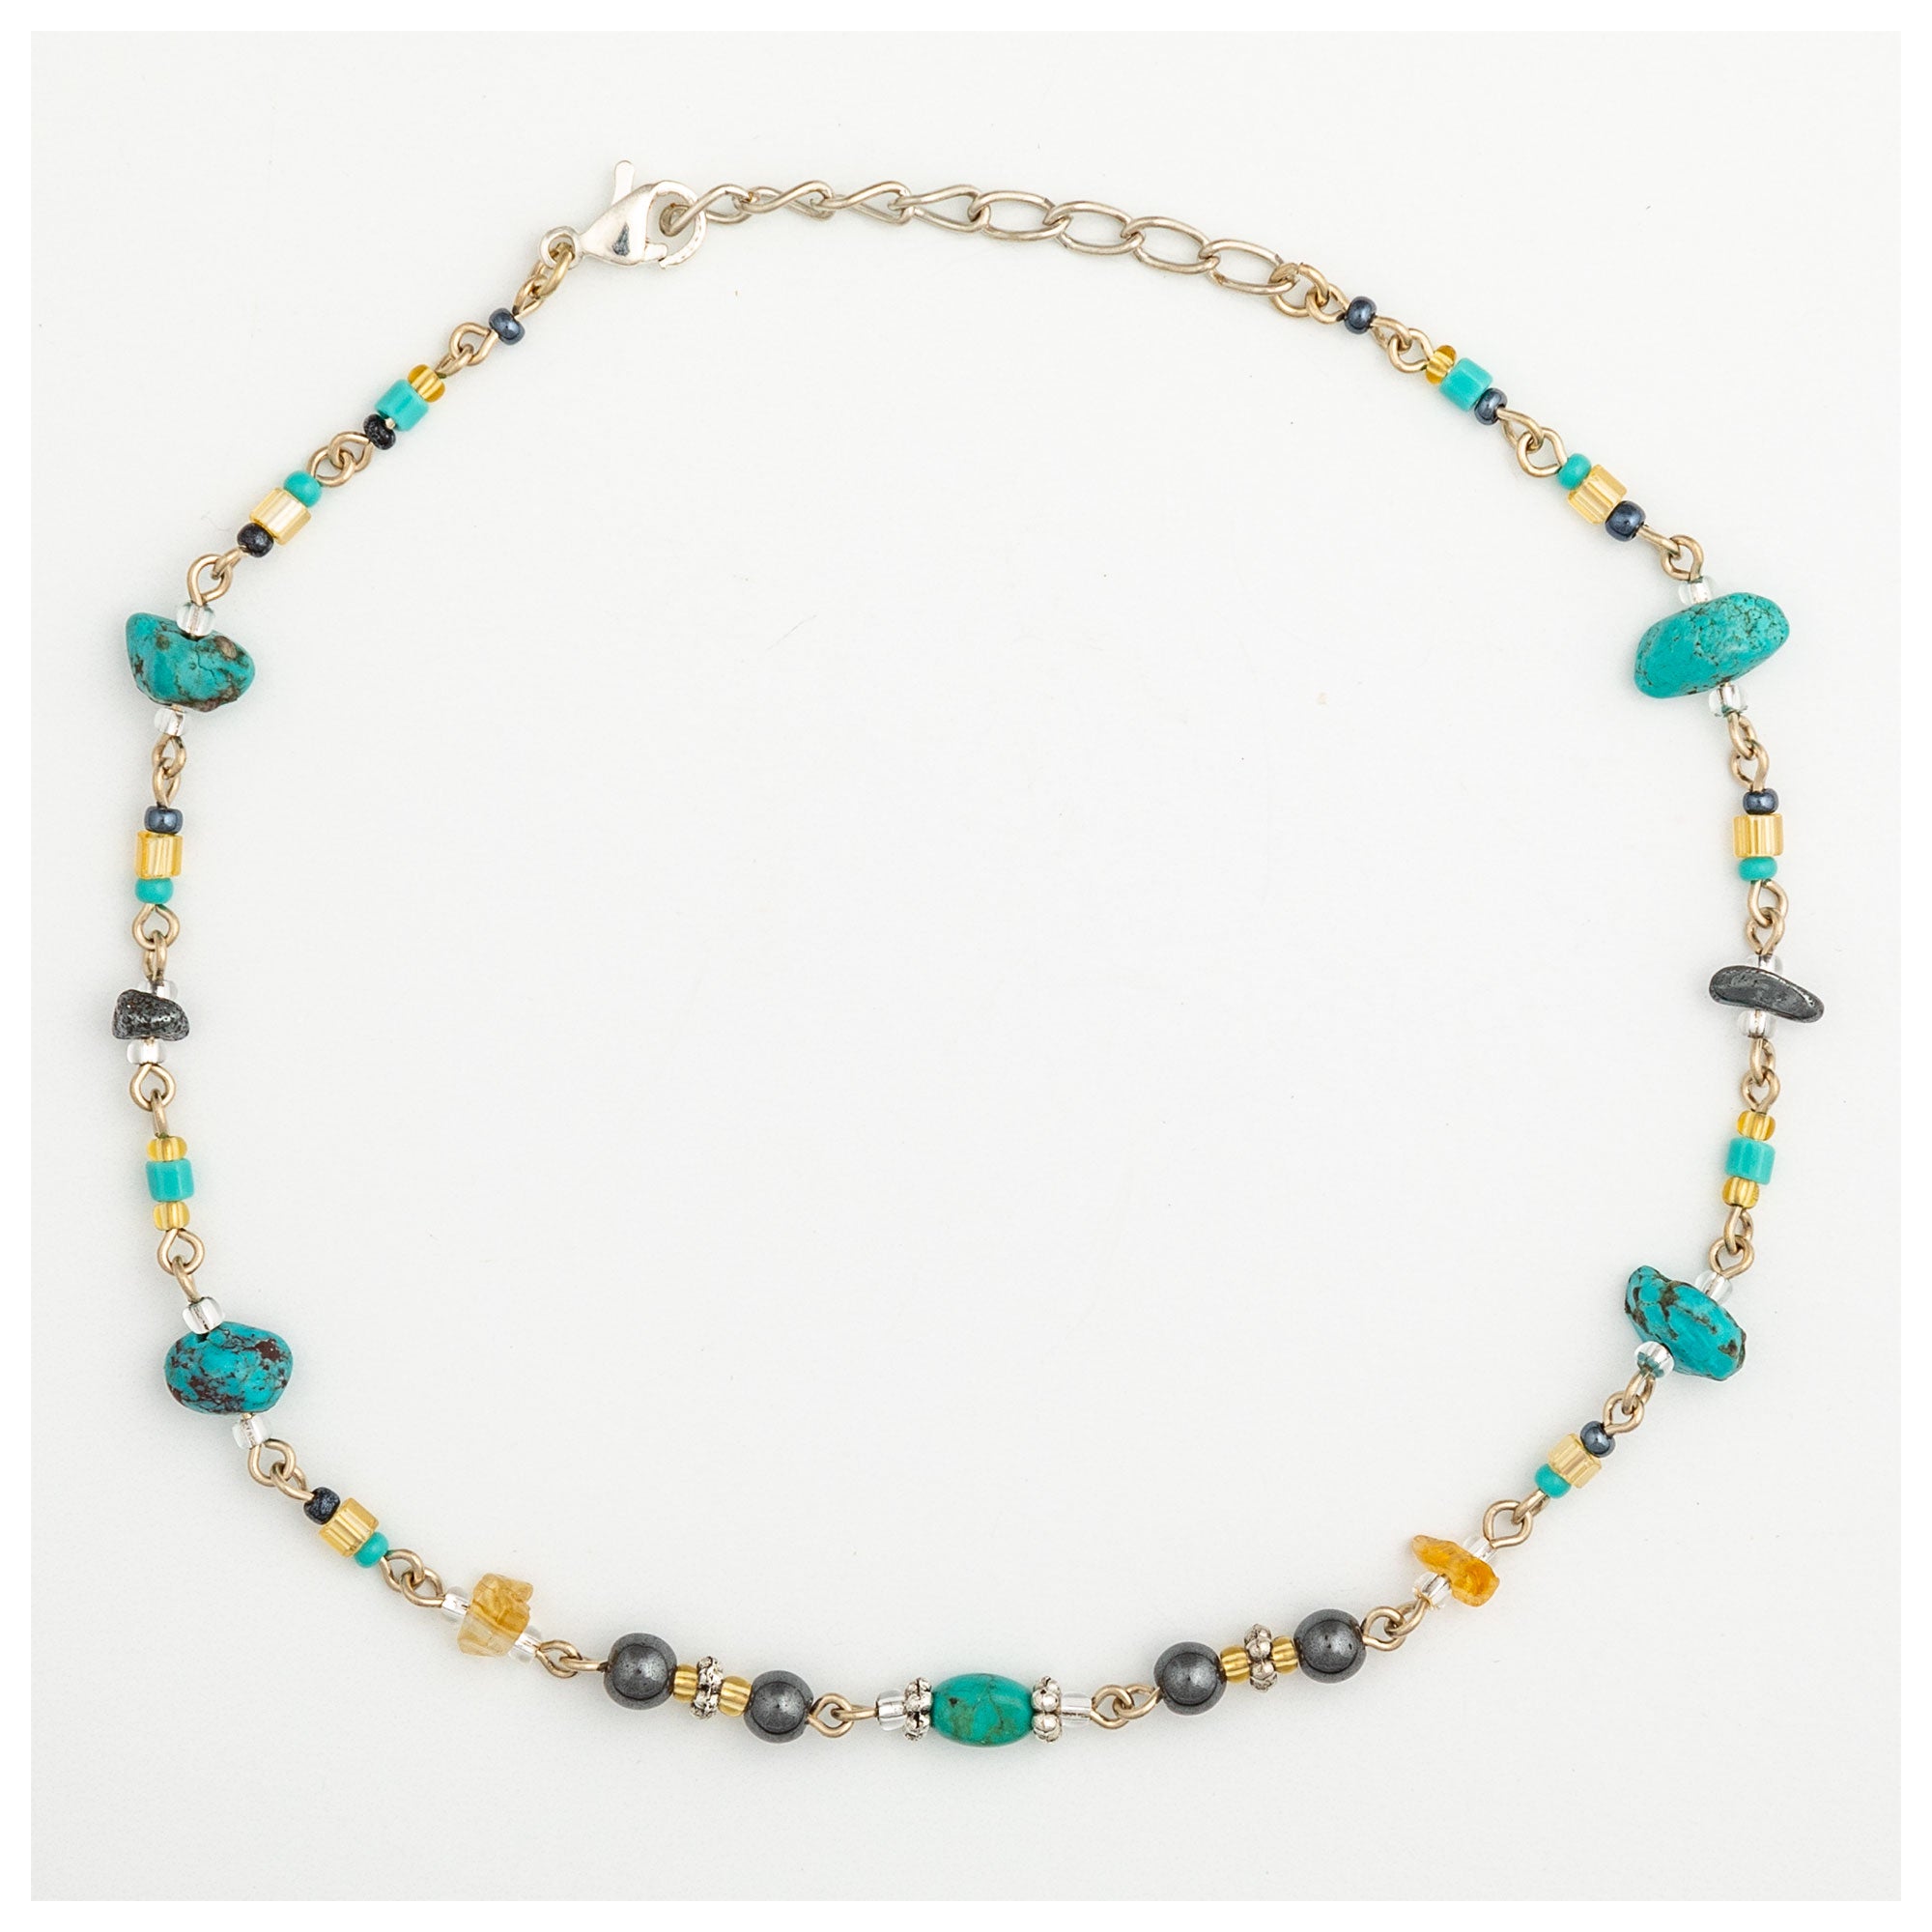 Dangling Gemstones Hand Beaded Anklet - Turquoise